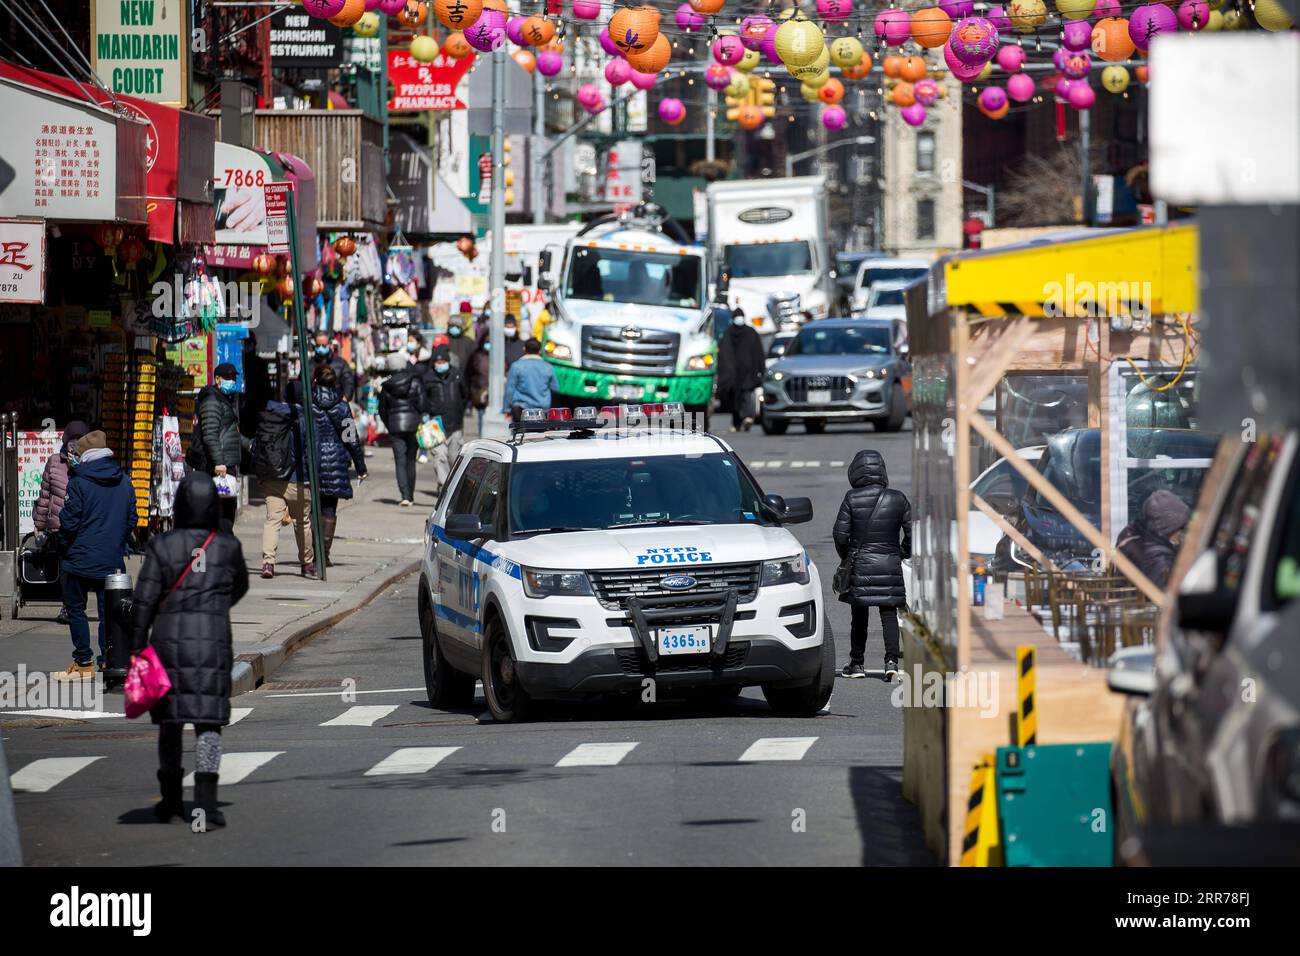 210320 -- NEW YORK, March 20, 2021 -- A police car is seen patrolling in Chinatown of New York, the United States, March 19, 2021. New York Police Department has stepped up security for the Asian neighborhoods across New York City as precaution and a direct response to the Atlanta shootings, in which eight people, six of whom were Asian and two were white, were killed. Photo by /Xinhua U.S.-NEW YORK-ASIAN NEIGHBORHOODS-SECURITY MichaelxNagle PUBLICATIONxNOTxINxCHN Stock Photo